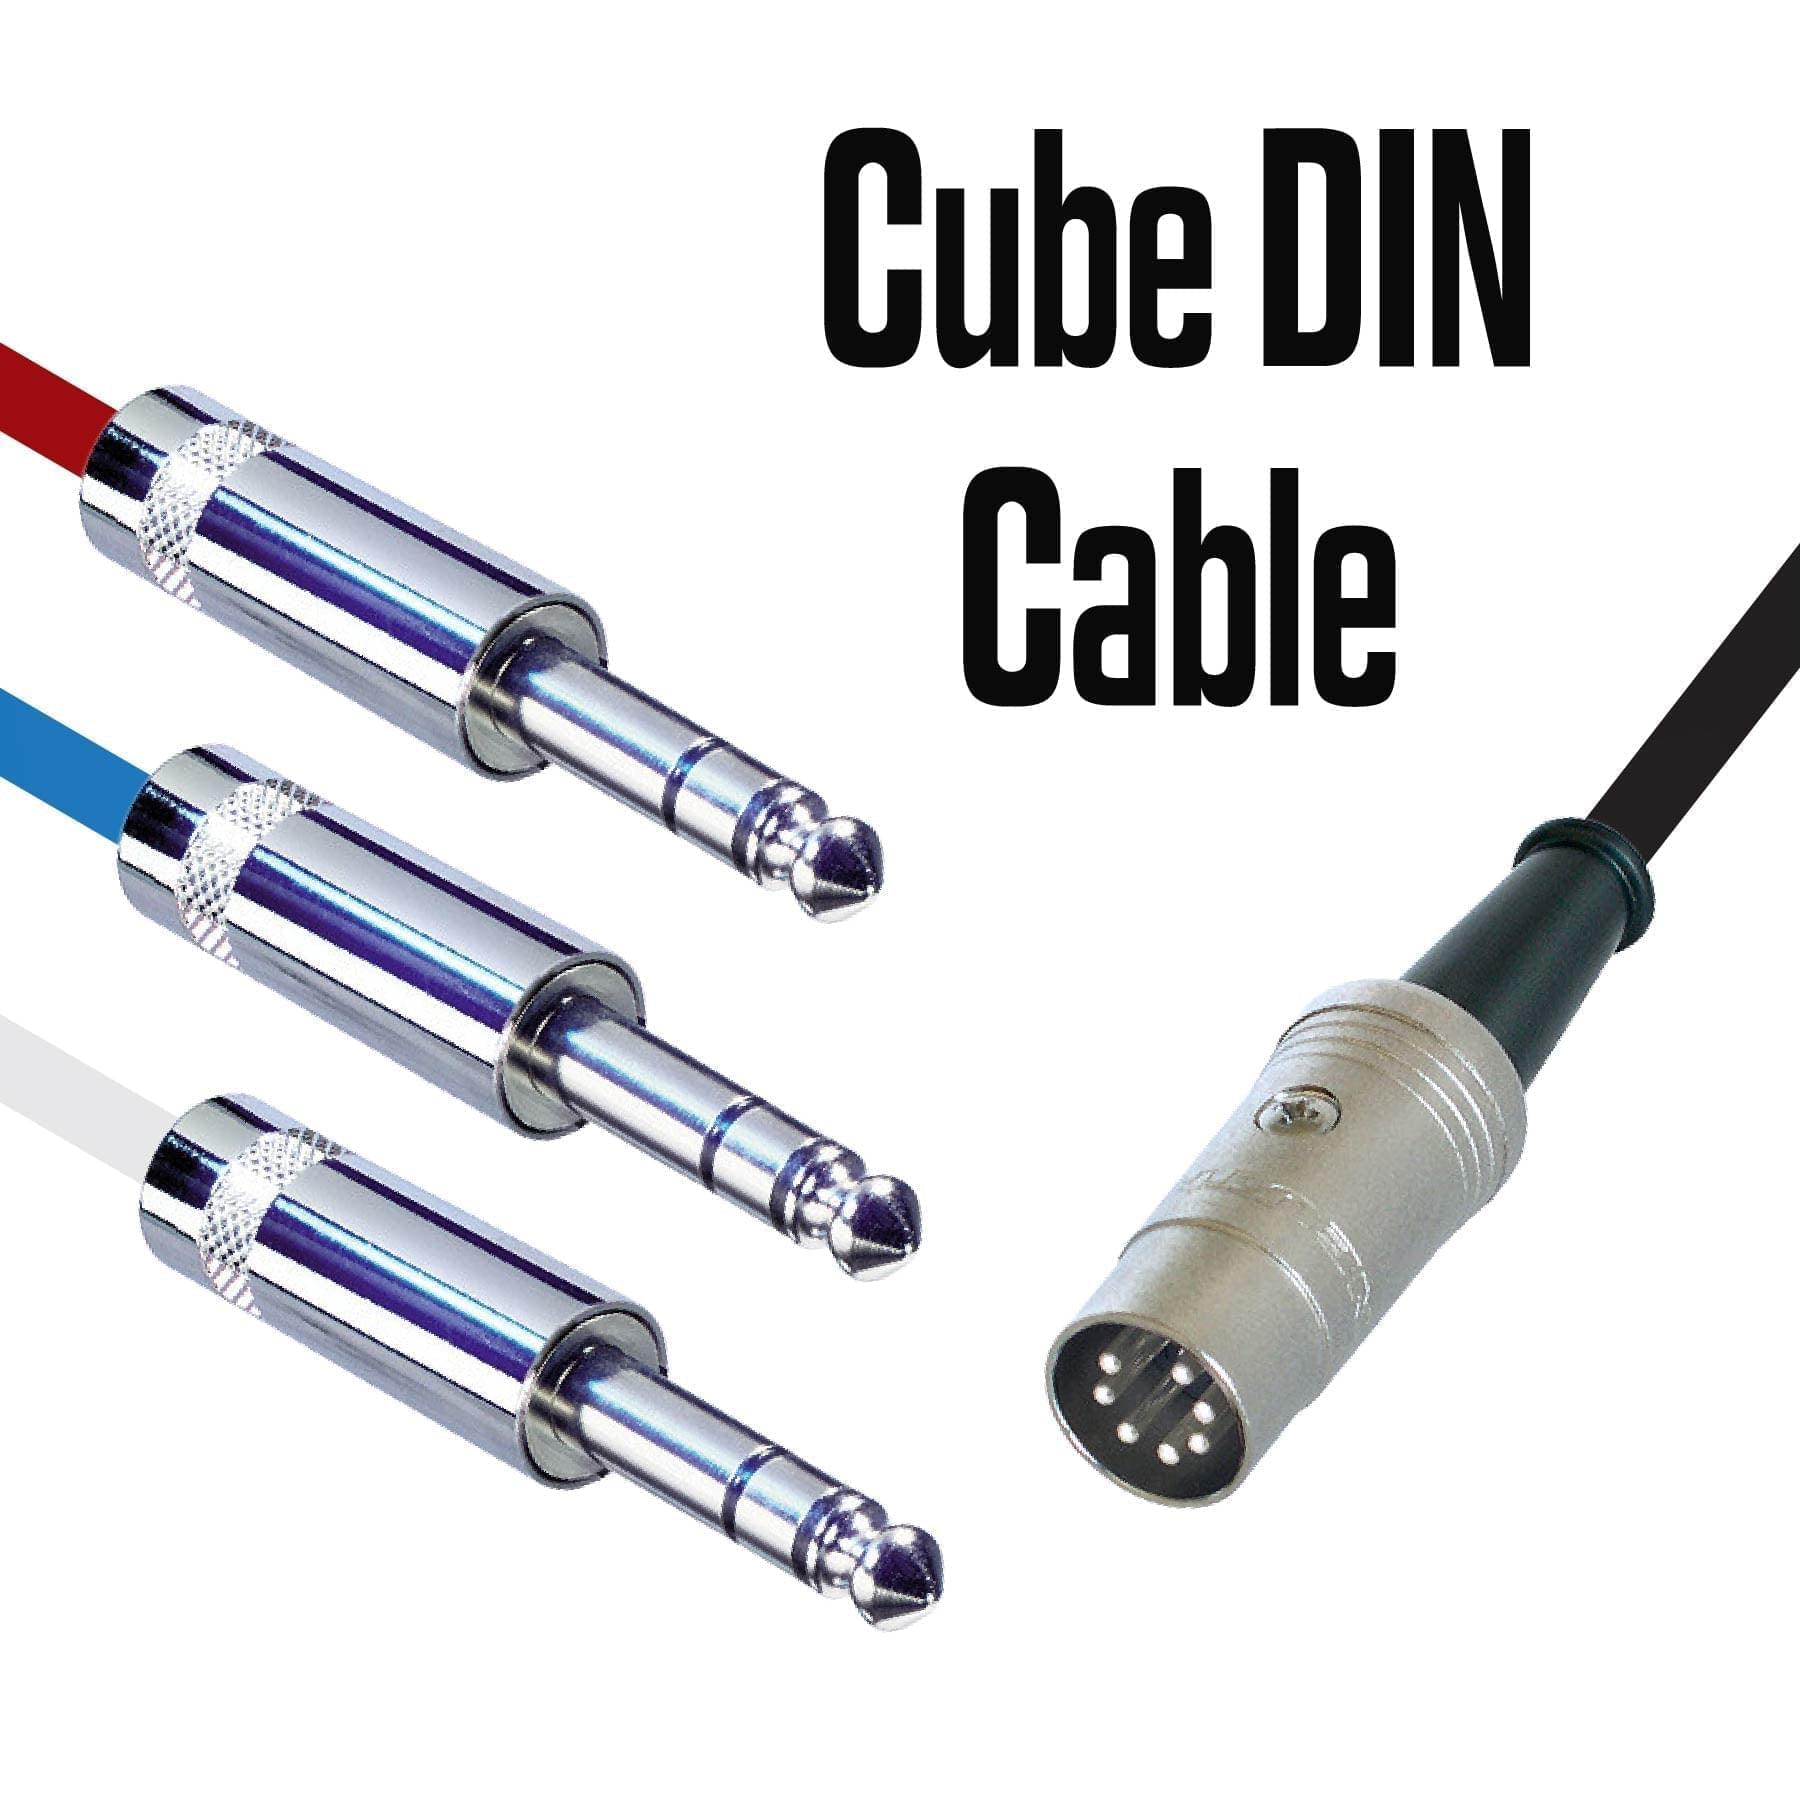 4m Cube DIN Cable